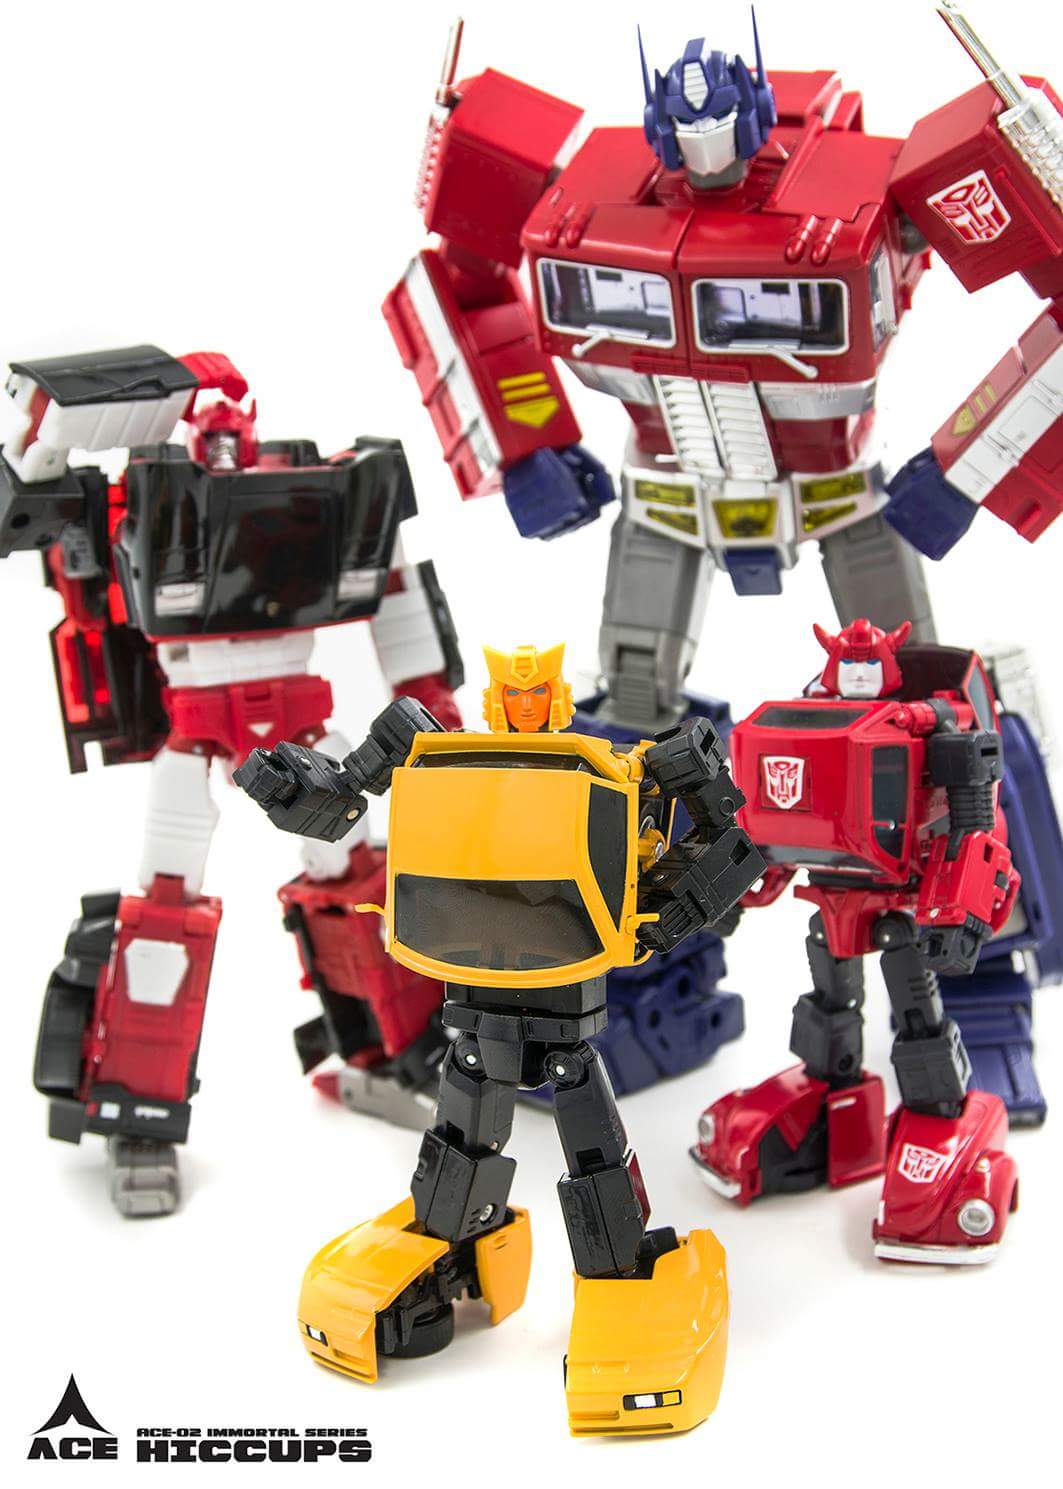 [ACE Collectables] Produit Tiers - Minibots MP - ACE-01 Tumbler (aka Cliffjumper/Matamore), ACE-02 Hiccups (aka Hubcap/Virevolto), ACE-03 Trident (aka Seaspray/Embruns) GUnHNh0I